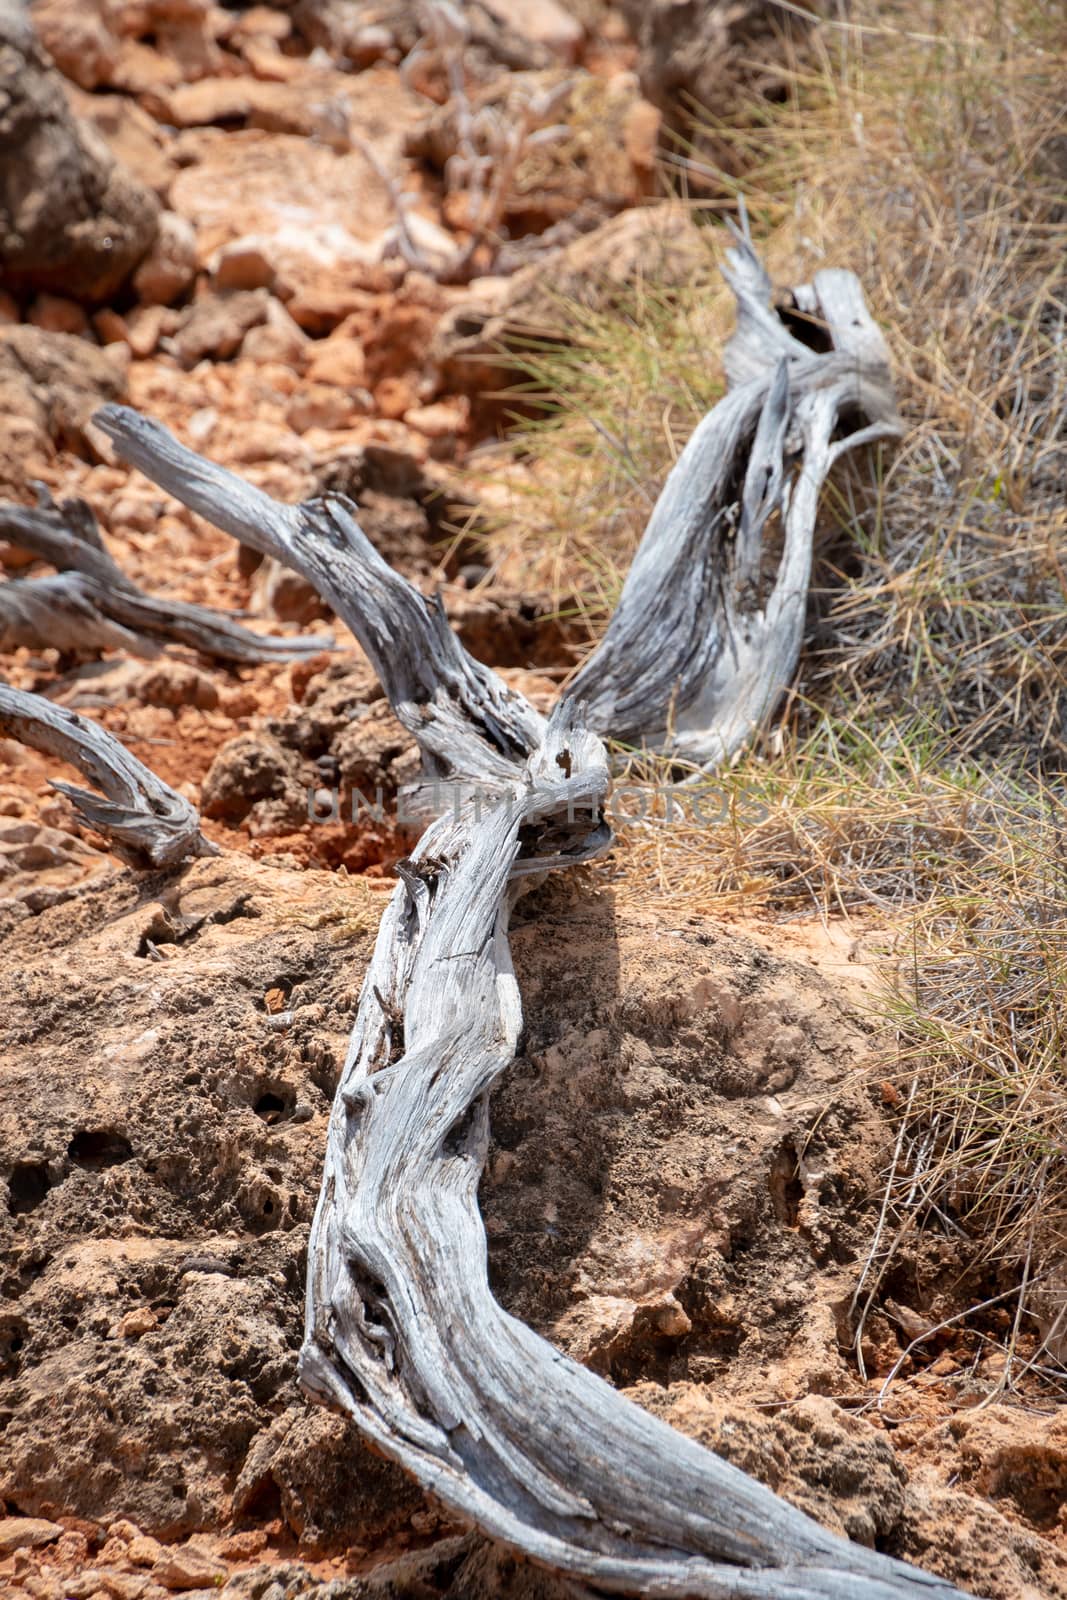 Dry and dead tree branch at Cape Range National Park Australia